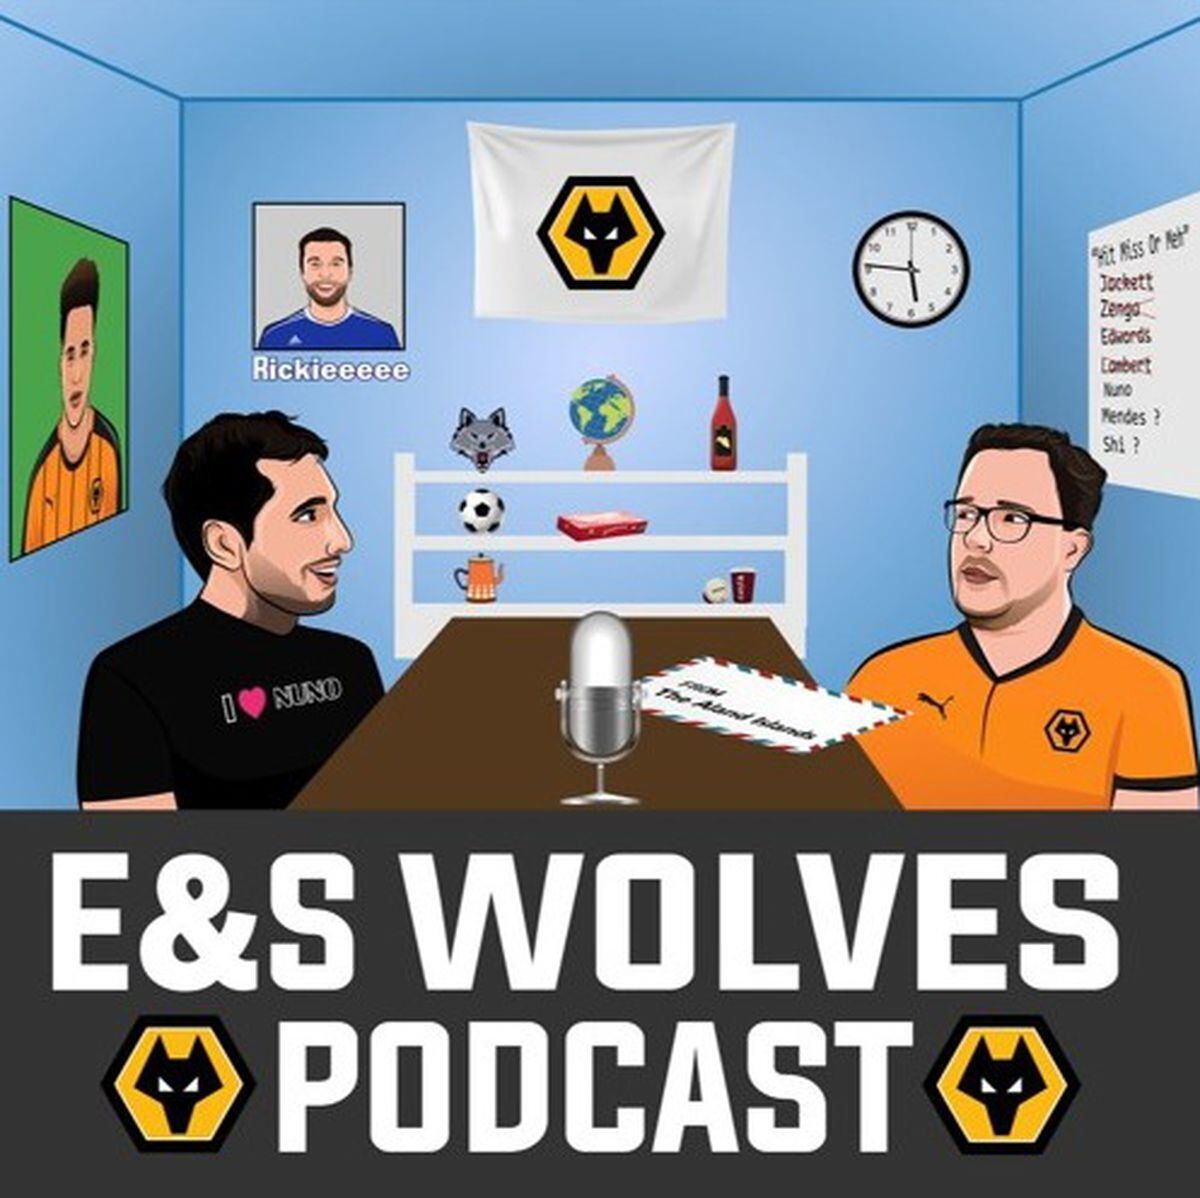 E&S Wolves Podcast - Episode 128: Deadline Day Armenian special (via Istanbul!)